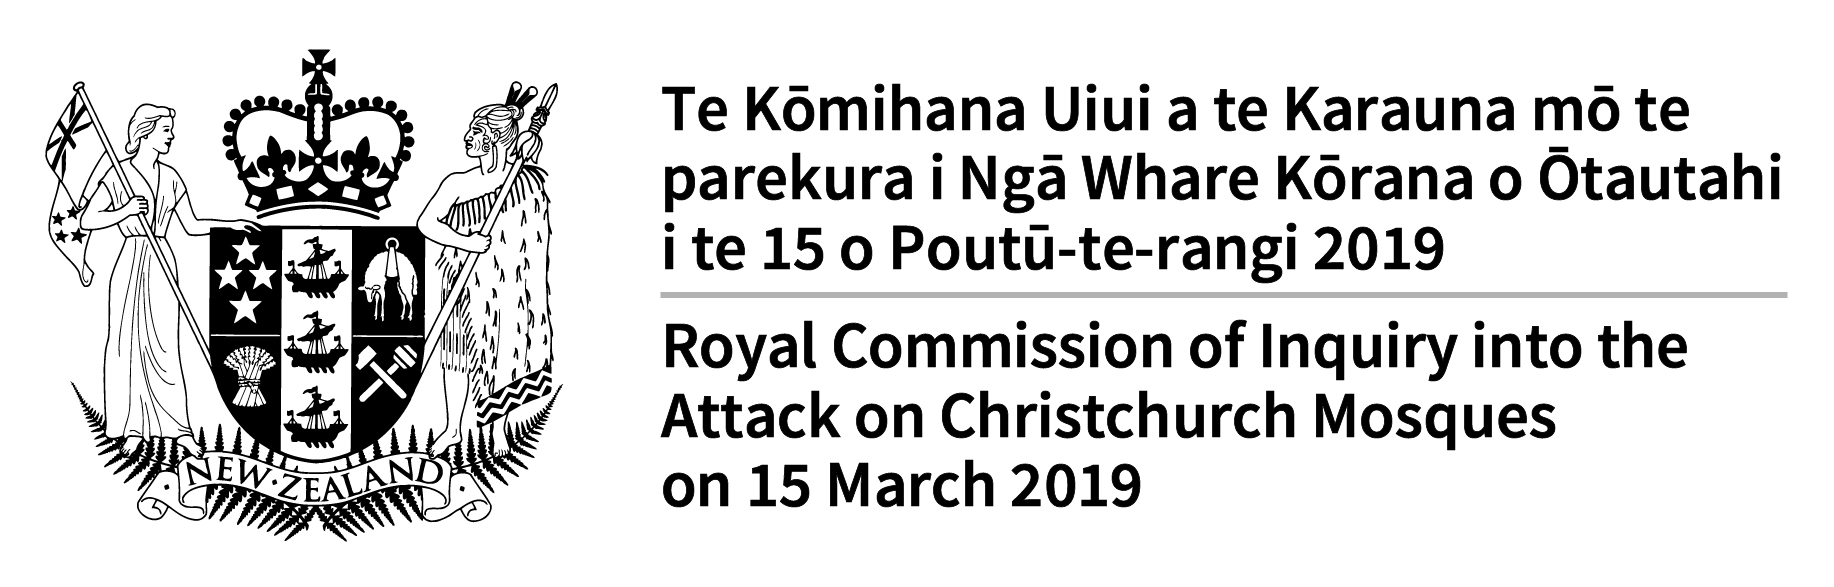 Royal Commission of Inquiry into the Attack on Christchurch Mosques on 15 March 2019